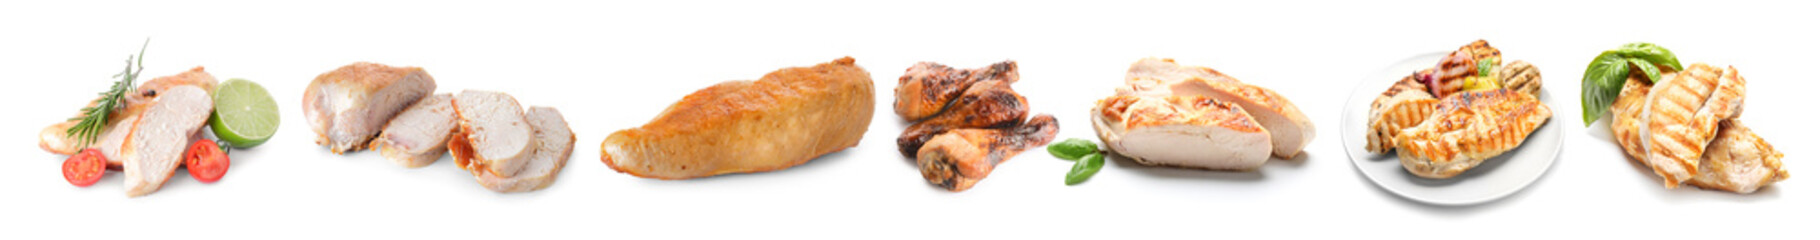 Tasty cooked chicken meat on white background